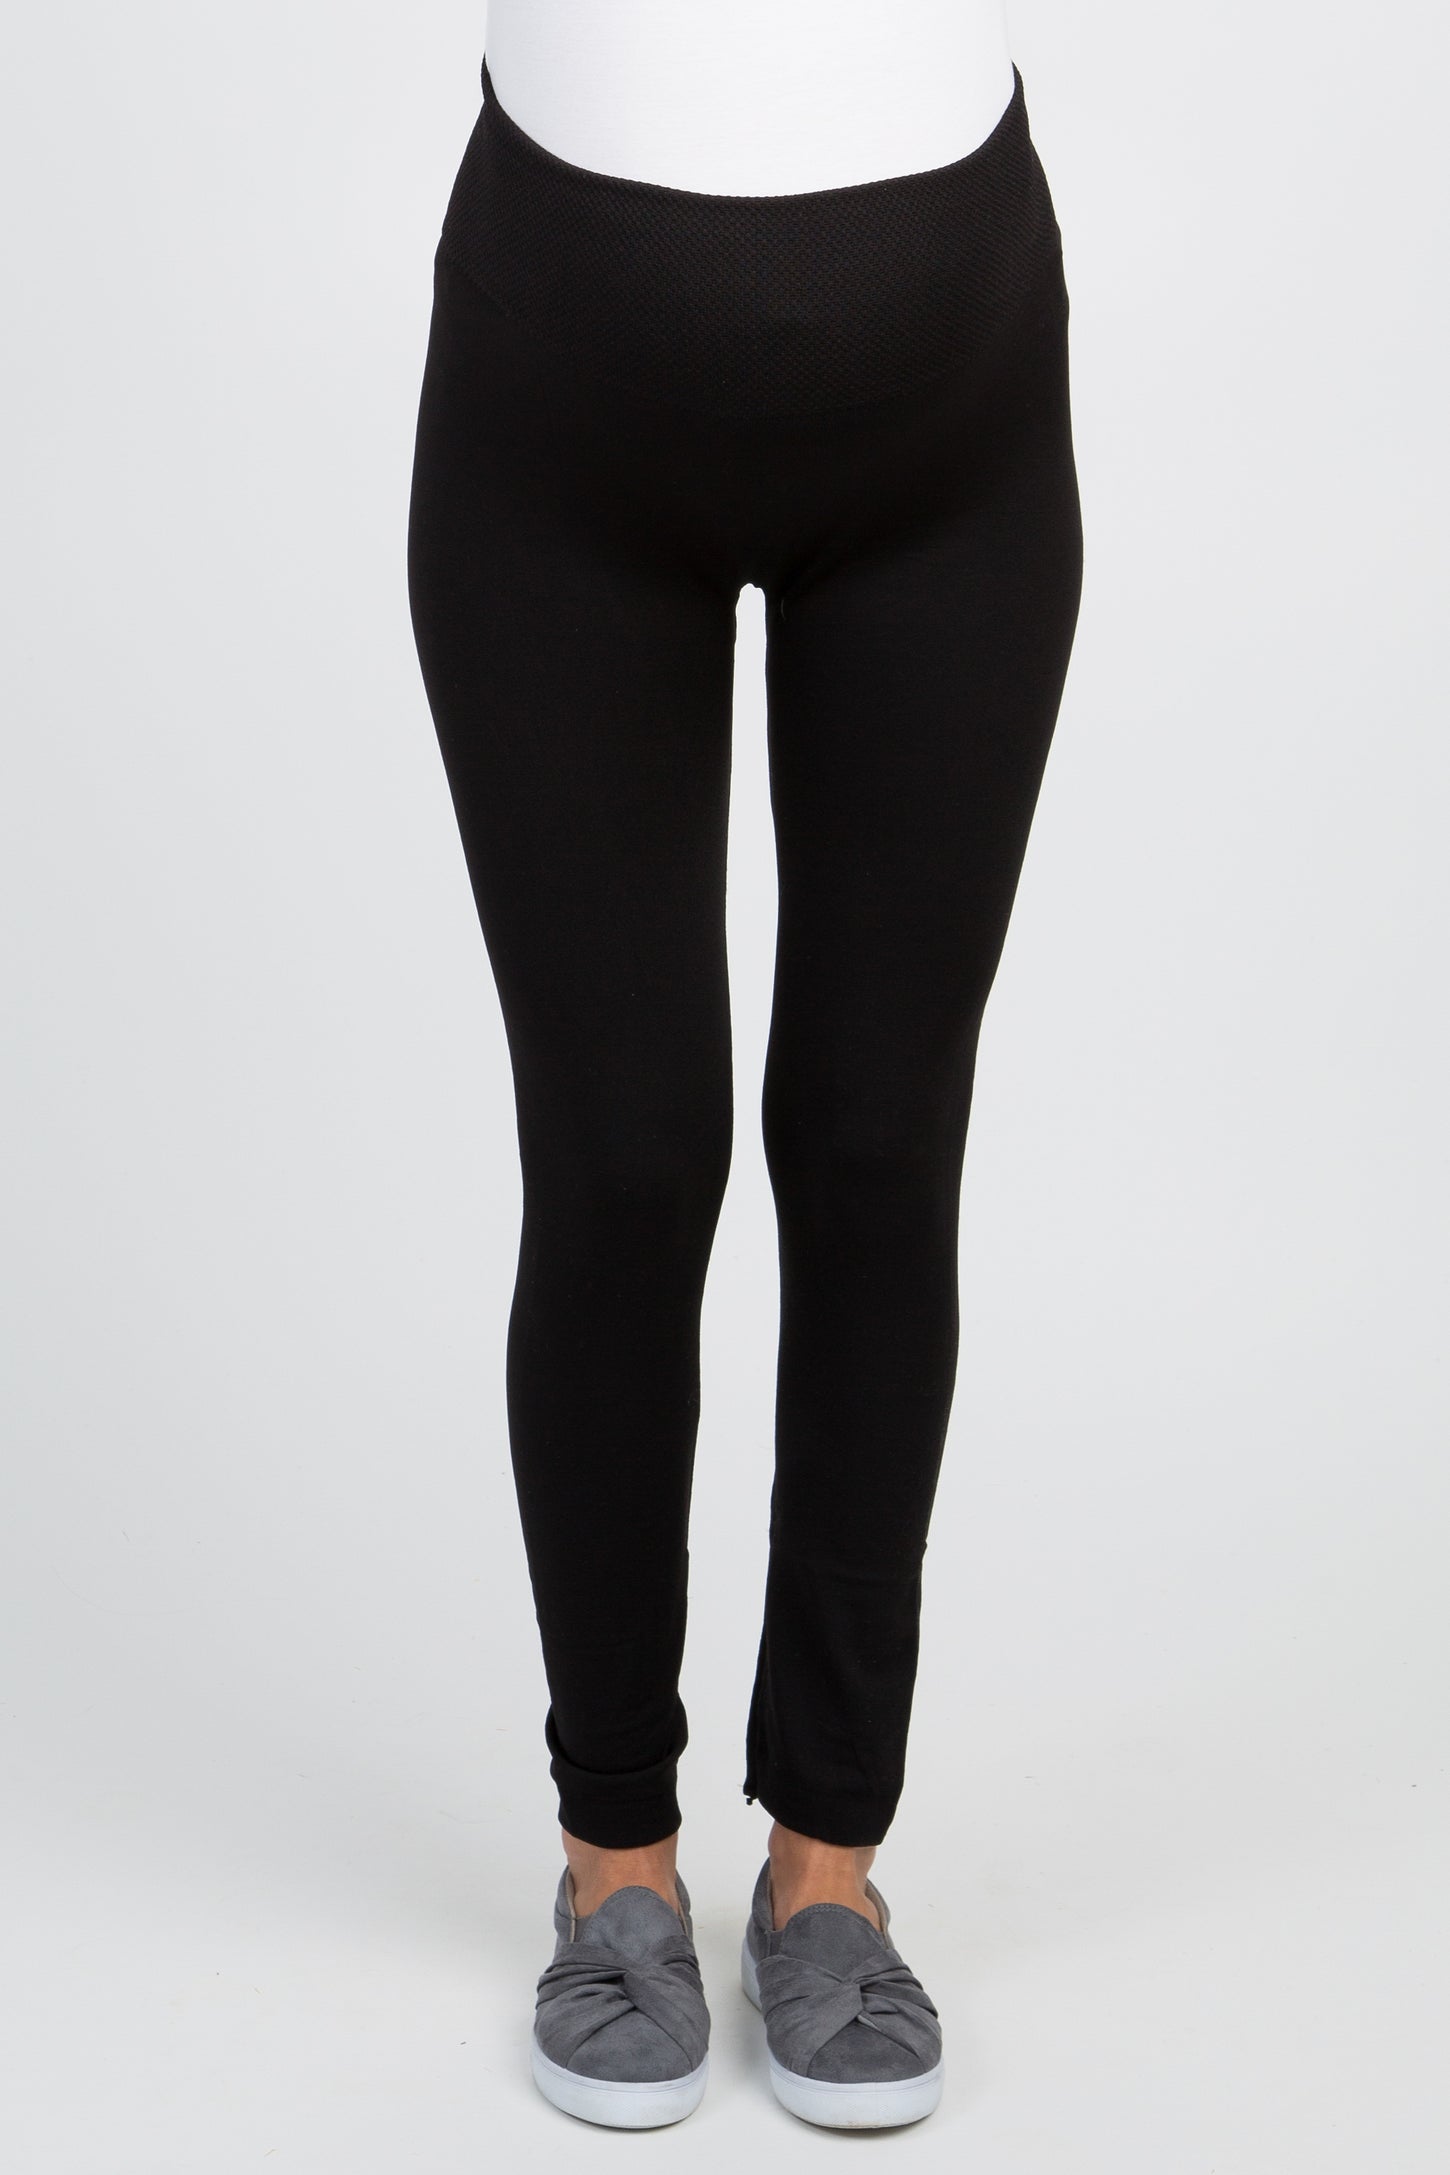 SG Stock] Women Fleeced Lined Thick Thermal Leggings Free Size (40